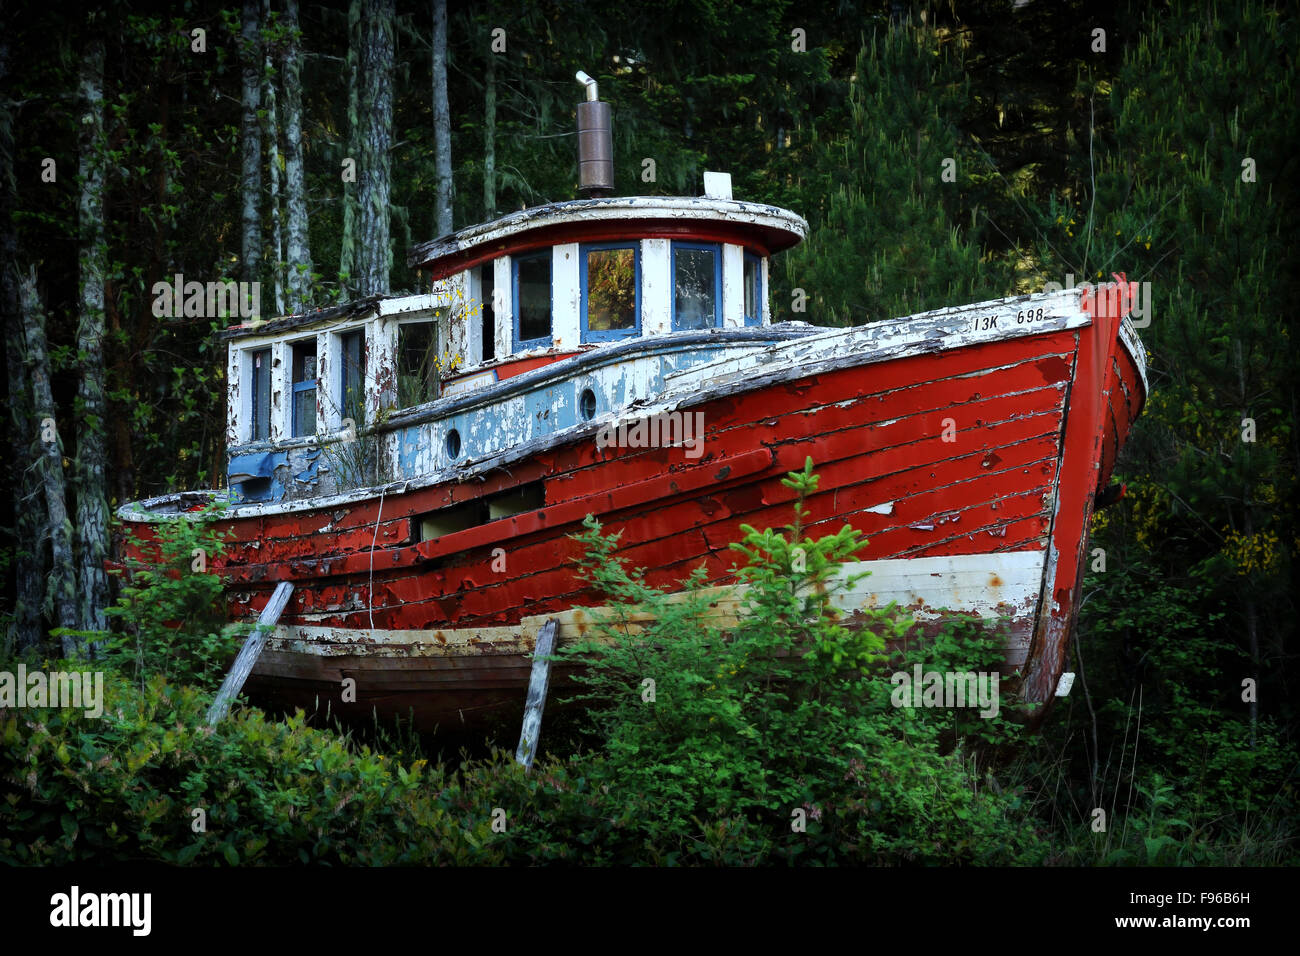 old wooden fishing boat, Vancouver Island, forest, British